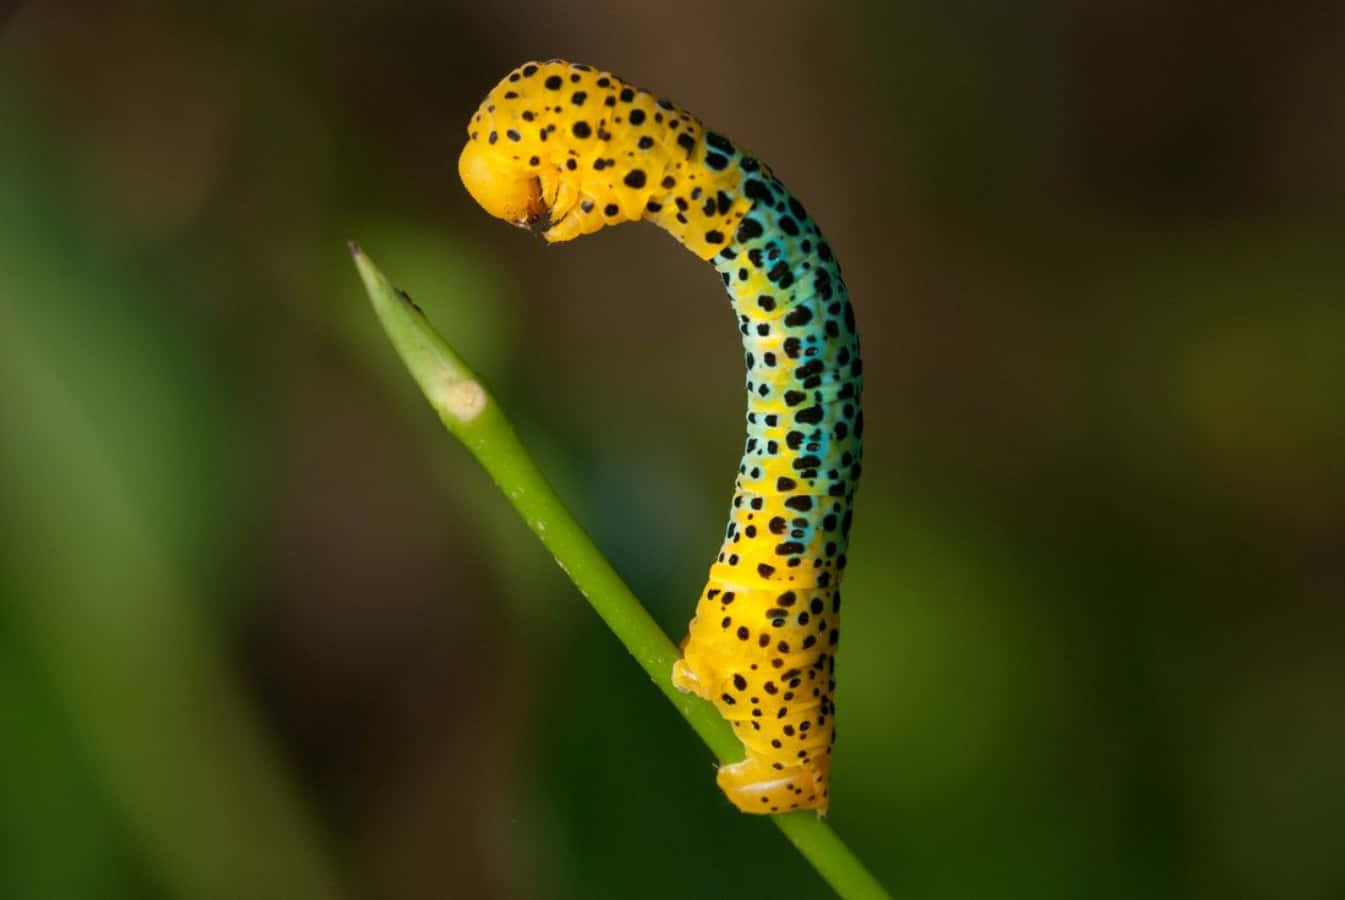 "The Bright Colors of this Caterpillar Insect Make it a True Sight to Behold"